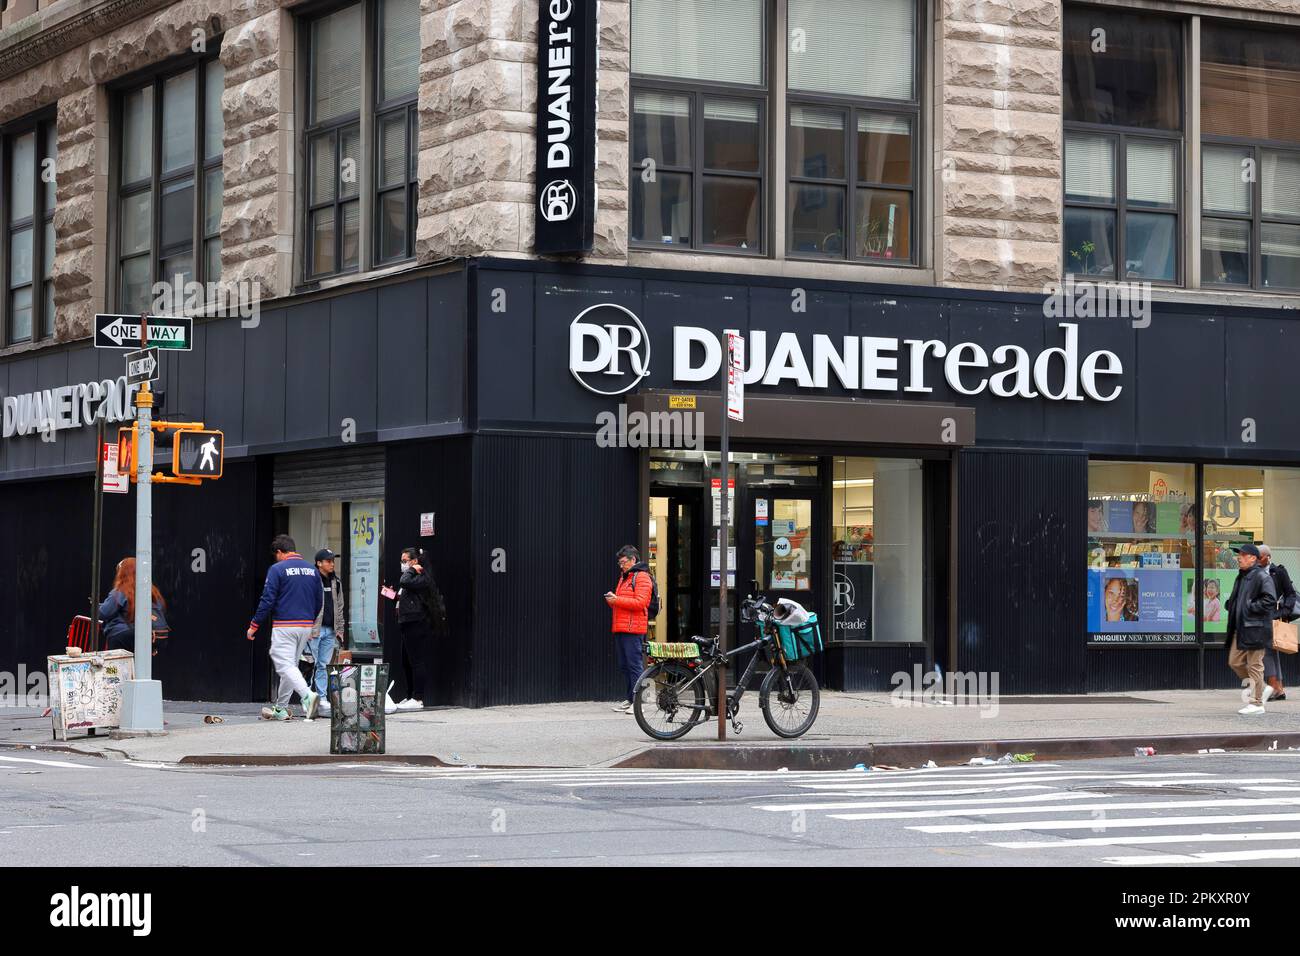 Duane Reade, 305 Broadway, New York, NYC storefront of a drug store in Lower Manhattan on the corner of Duane St, and a block from Reade St. Stock Photo